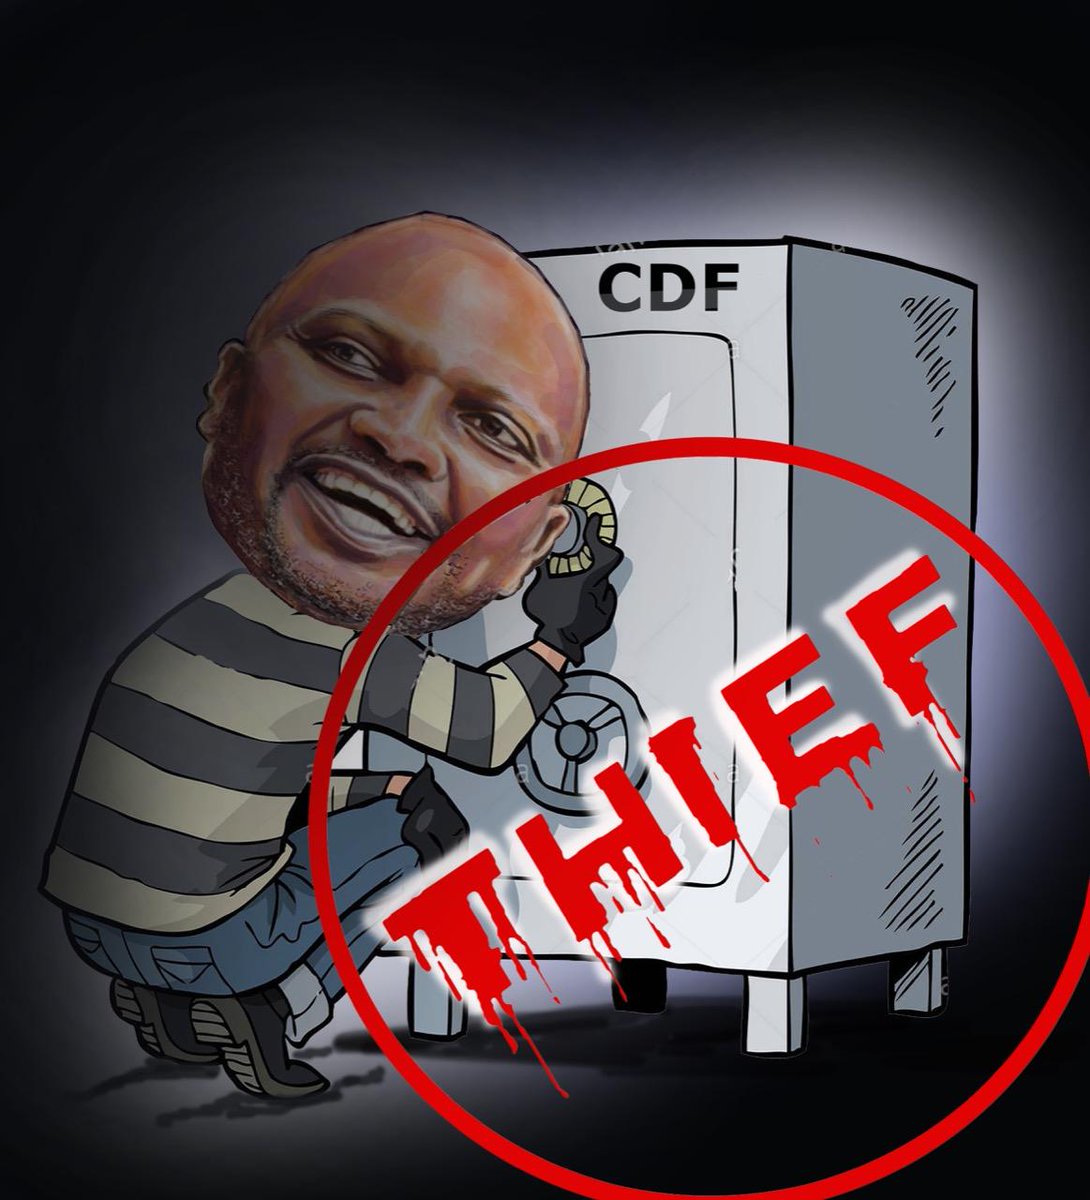 Moses Kuria has been stealing through family and friends. Major tenders are reserved for them. It is time now for him to face the law 
#GatunduCDFCorruption